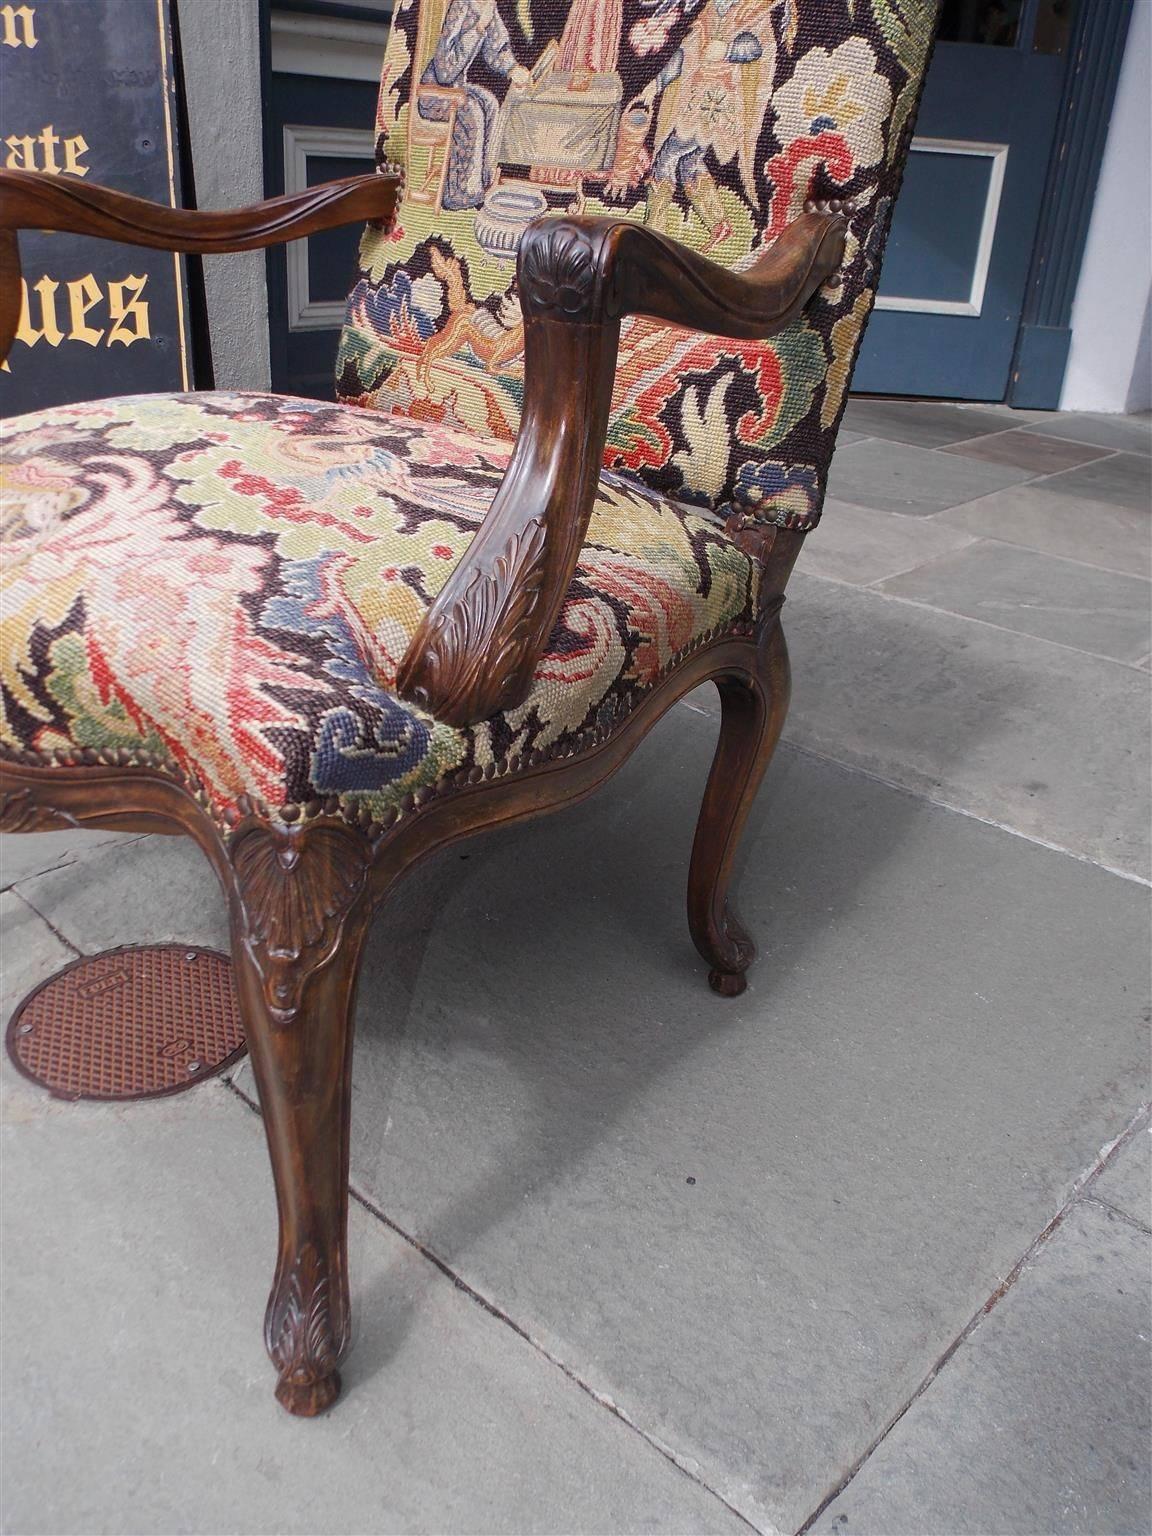 Mid-19th Century French Walnut Acanthus Armchair with Decorative Figural Needlepoint, Circa 1840